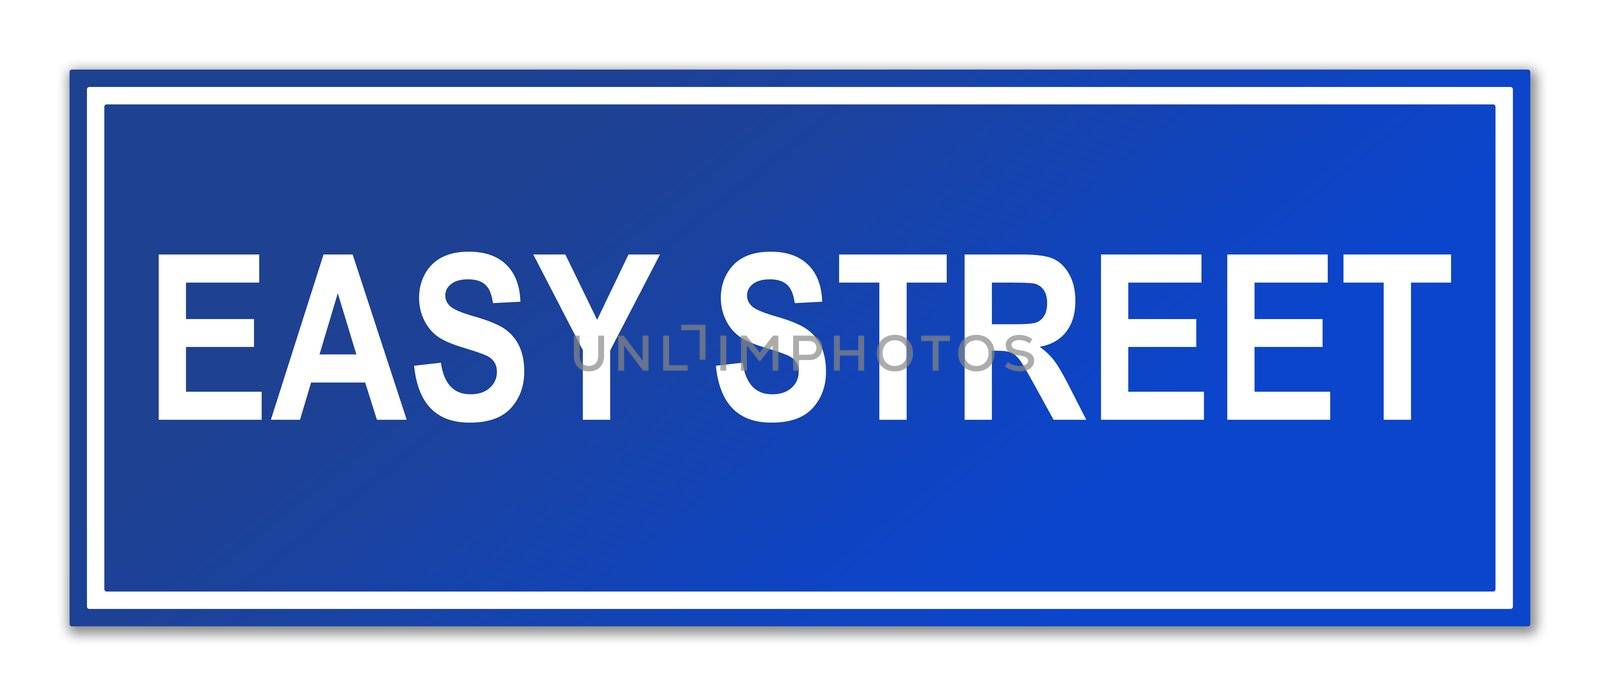 Easy street sign by speedfighter